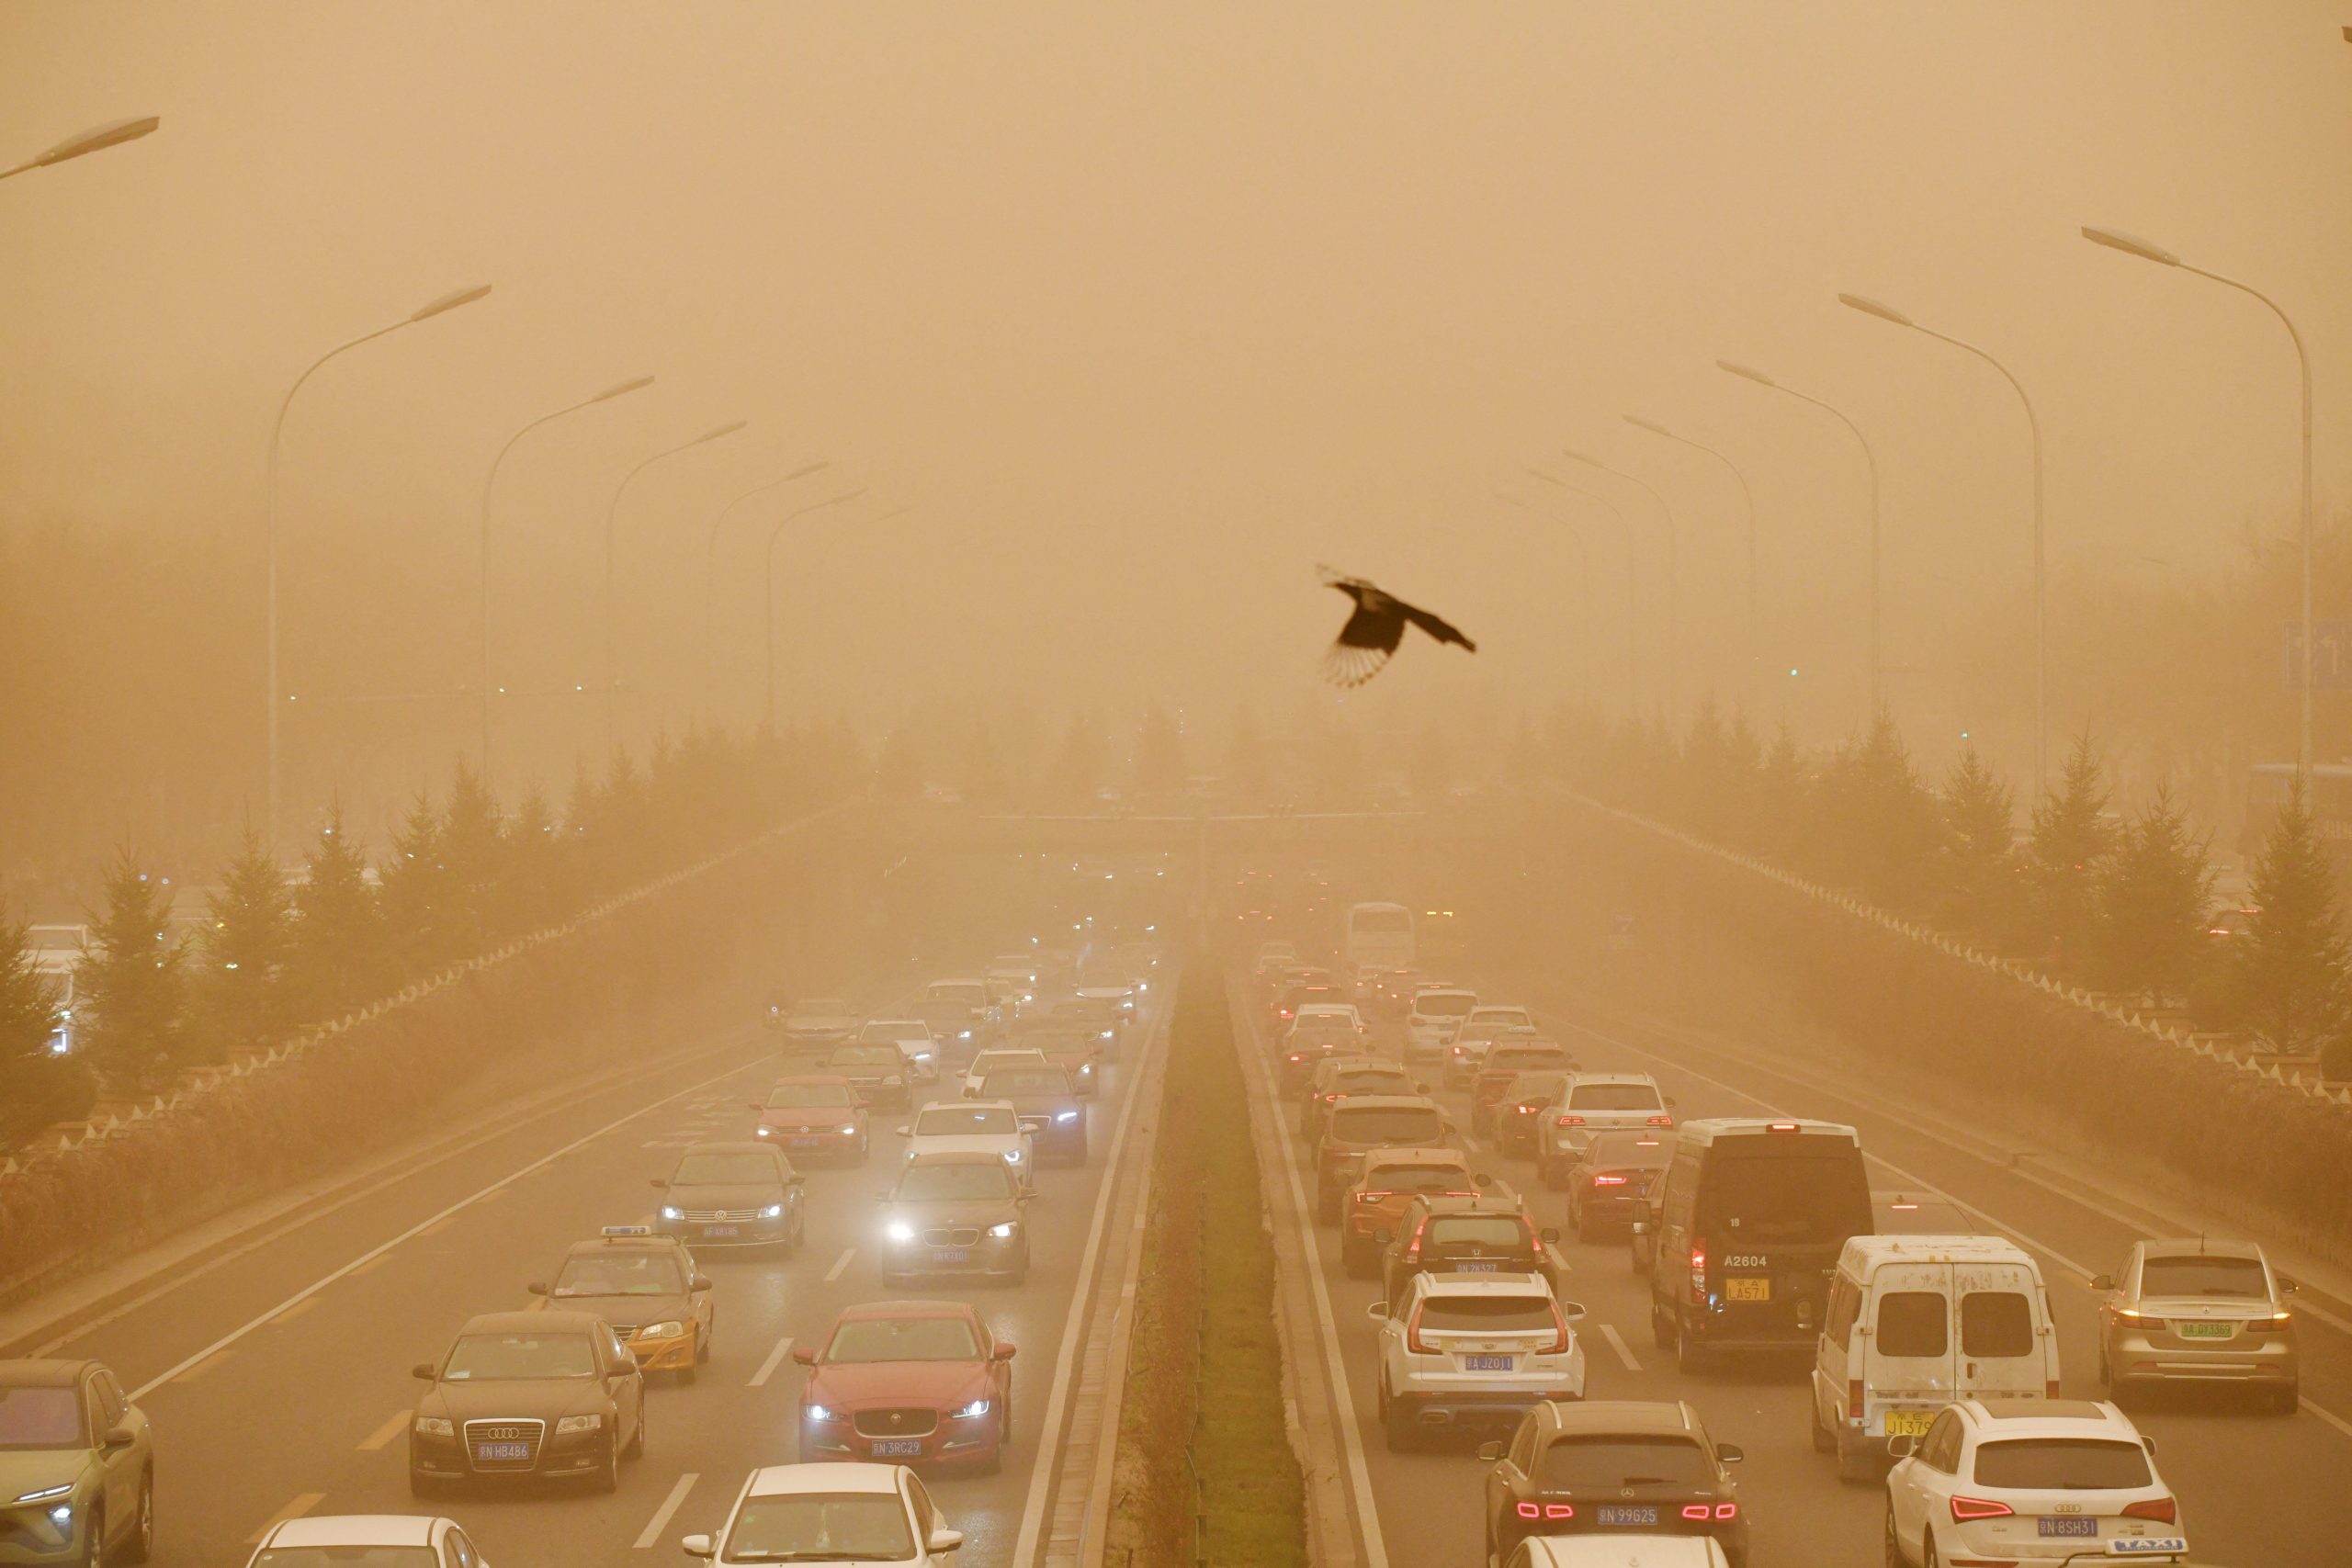 Skies over Beijing turn yellow as city sees worst sandstorm in decade. See photos